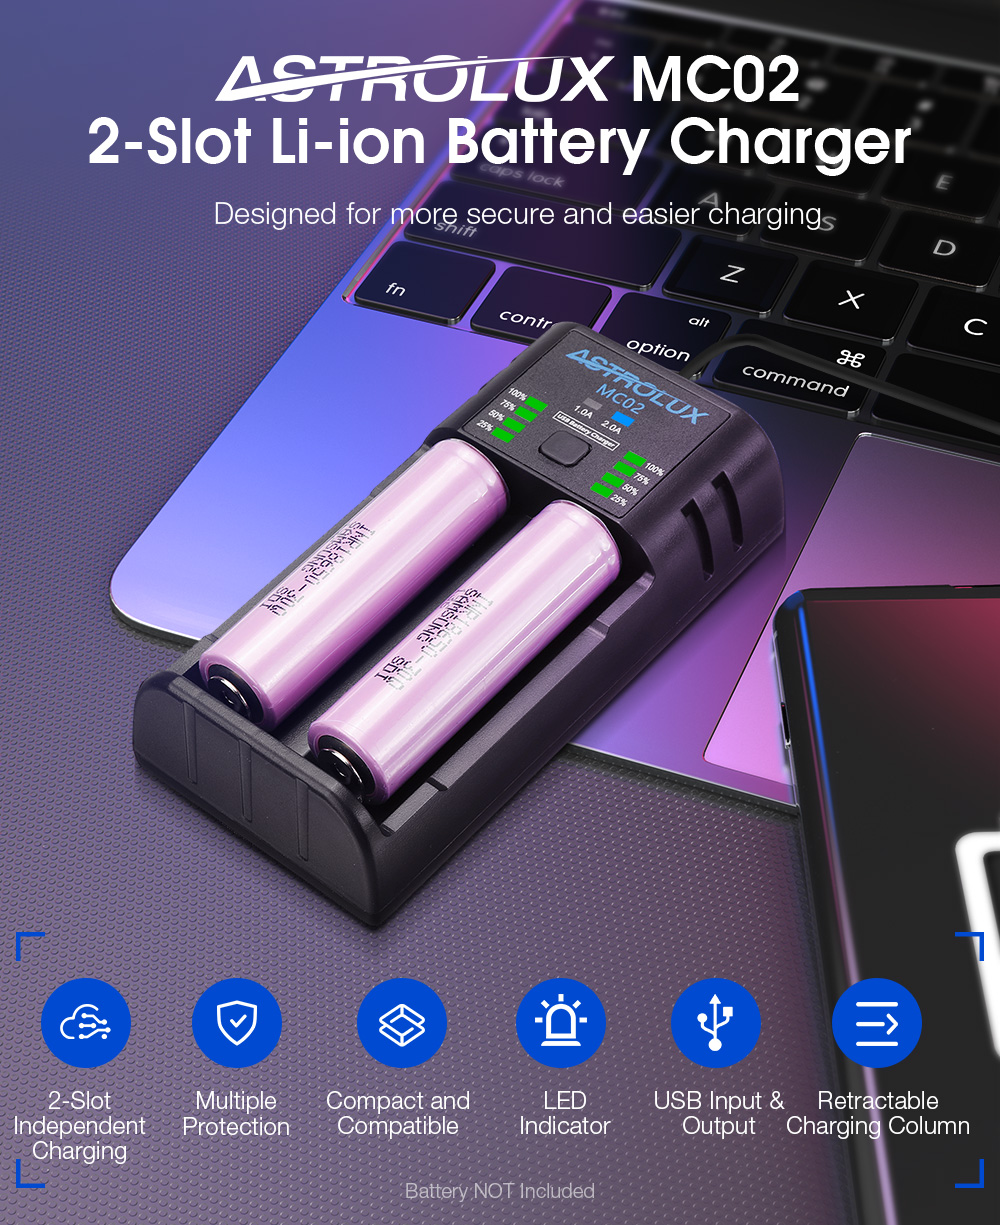 Astroluxreg-MC02-2-in1-USB-Charging-Mini-Battery-Charger-Portable-Mobile-Phone-Power-Bank-Current-Op-1763413-1